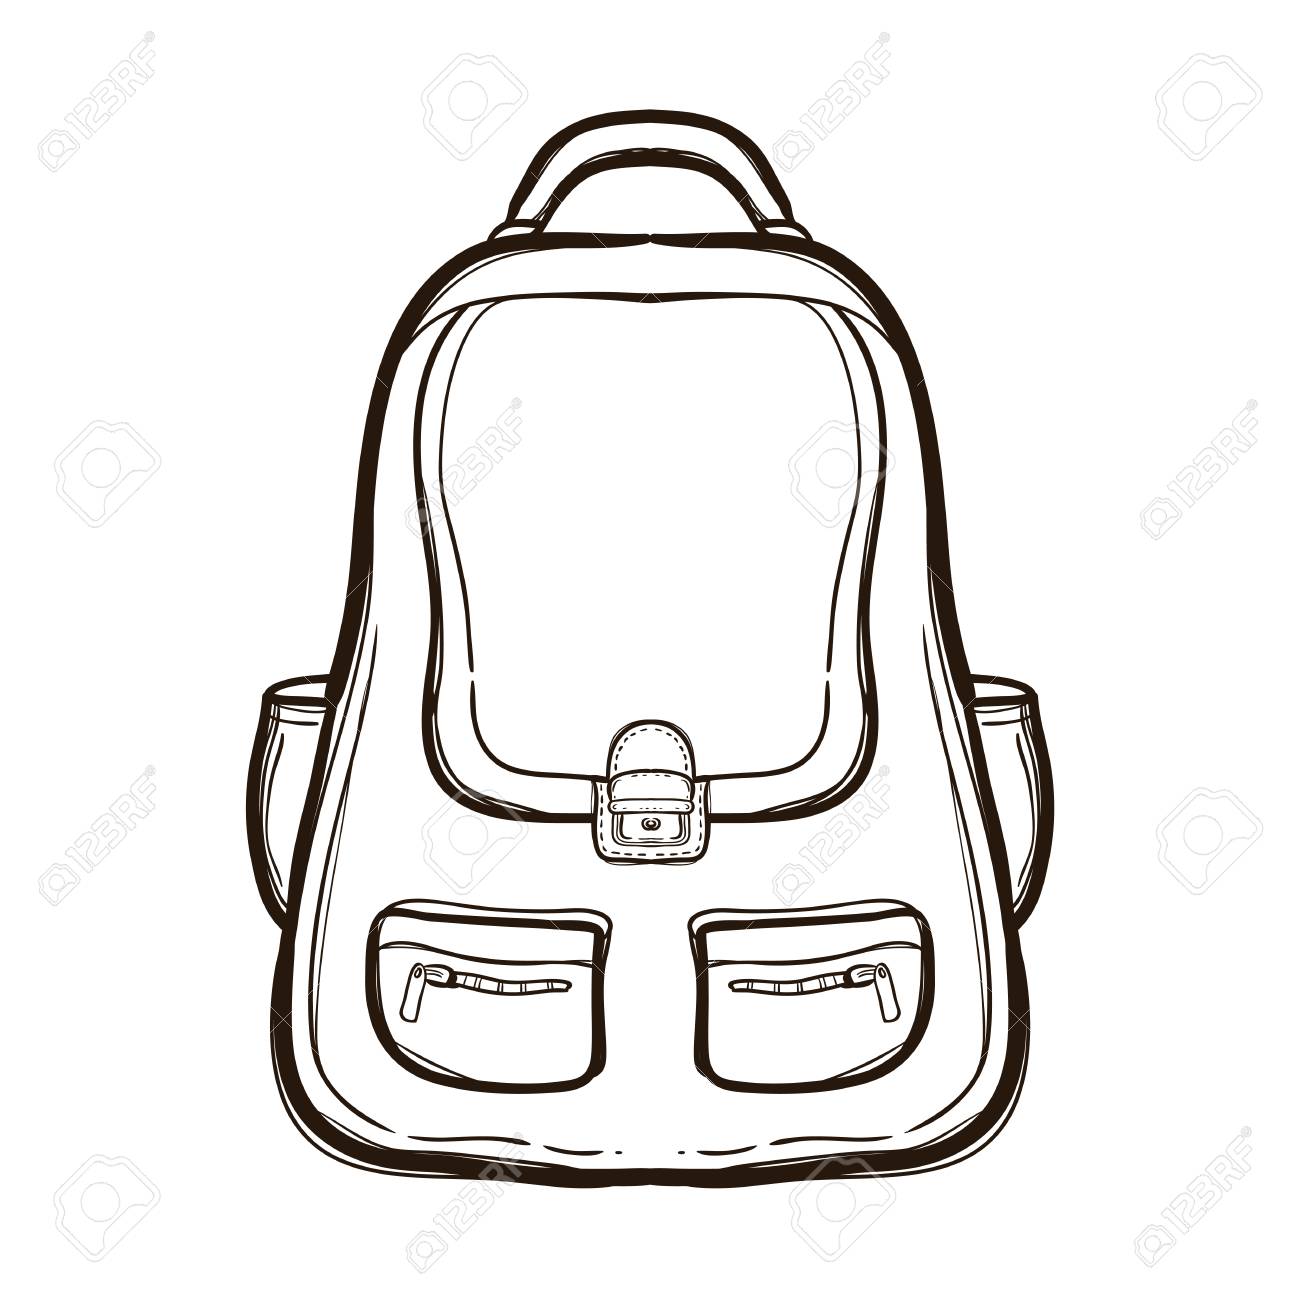 Black And White School Bag Clipart.